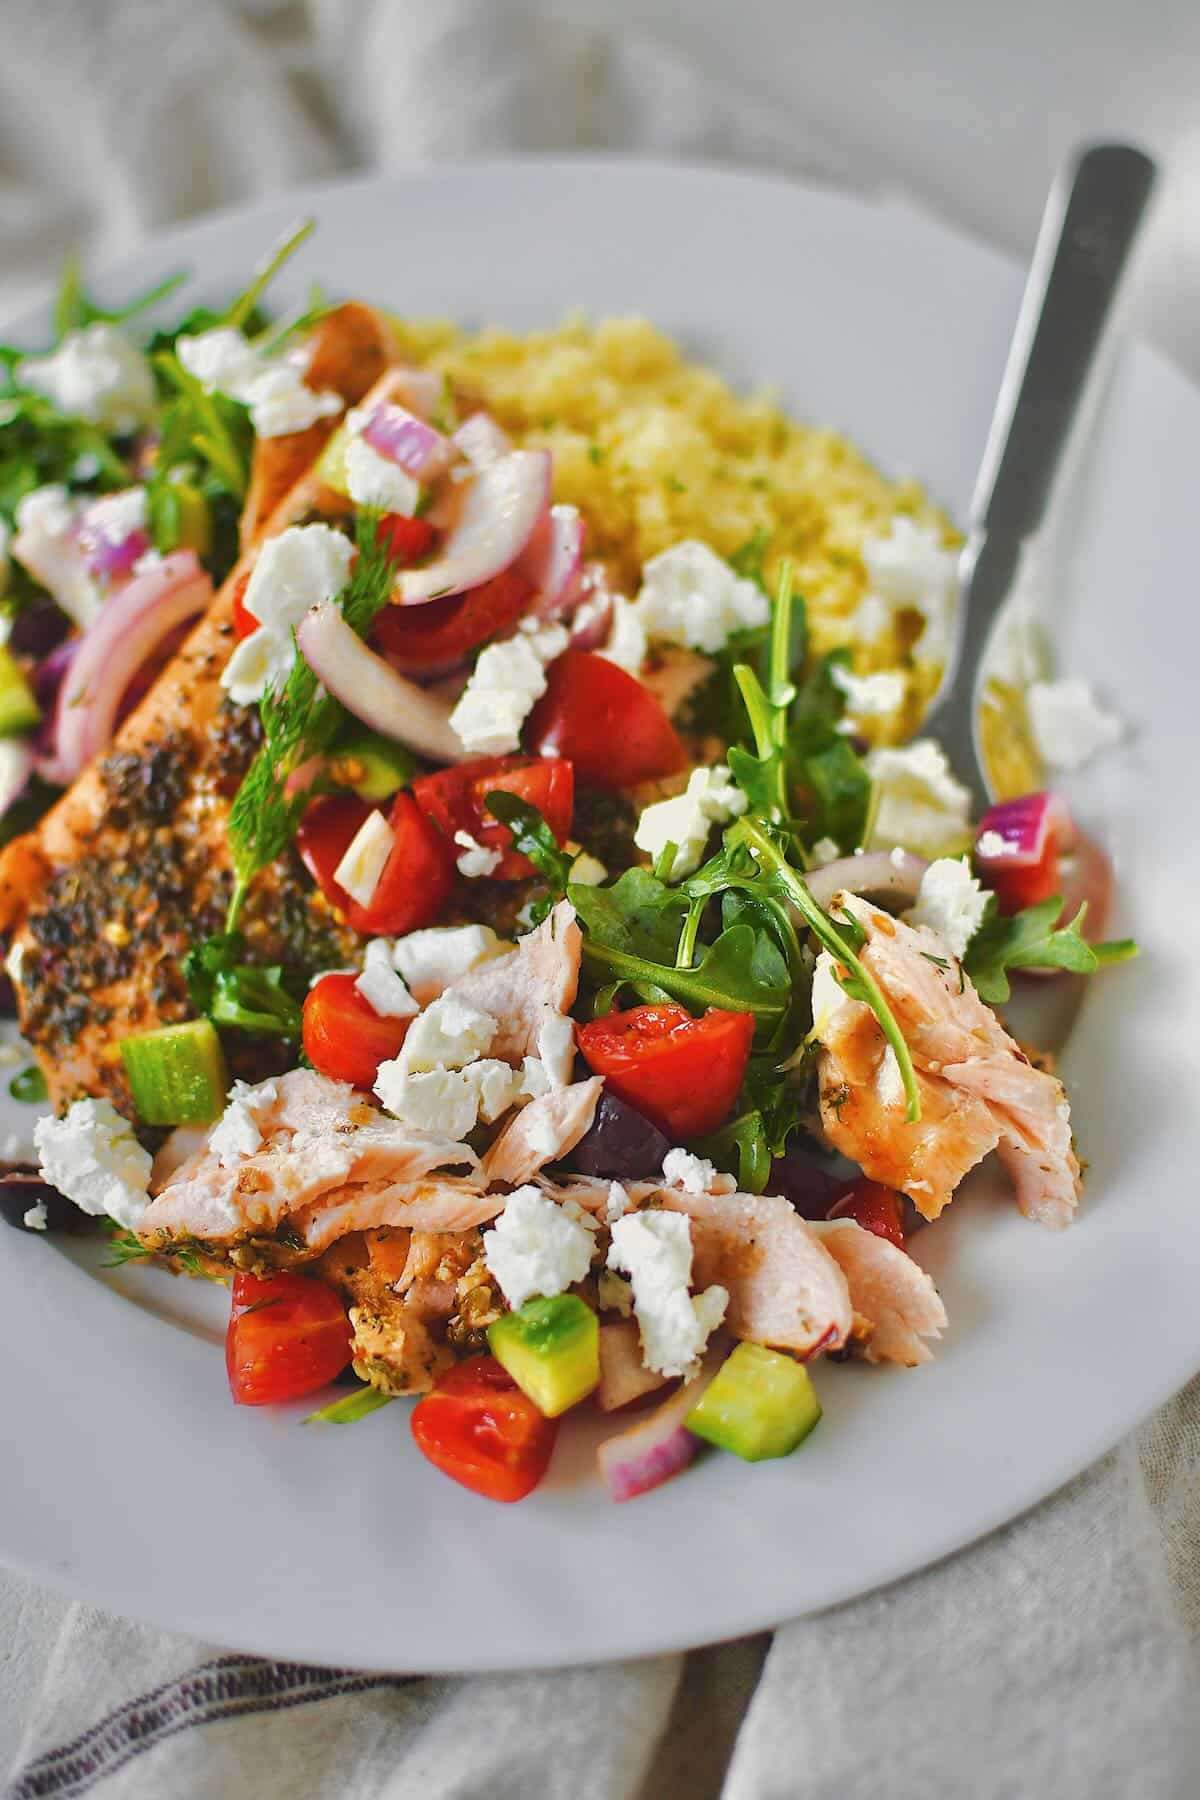 Greek Salmon topped with Greek salad topping of fresh veggies and feta cheese.